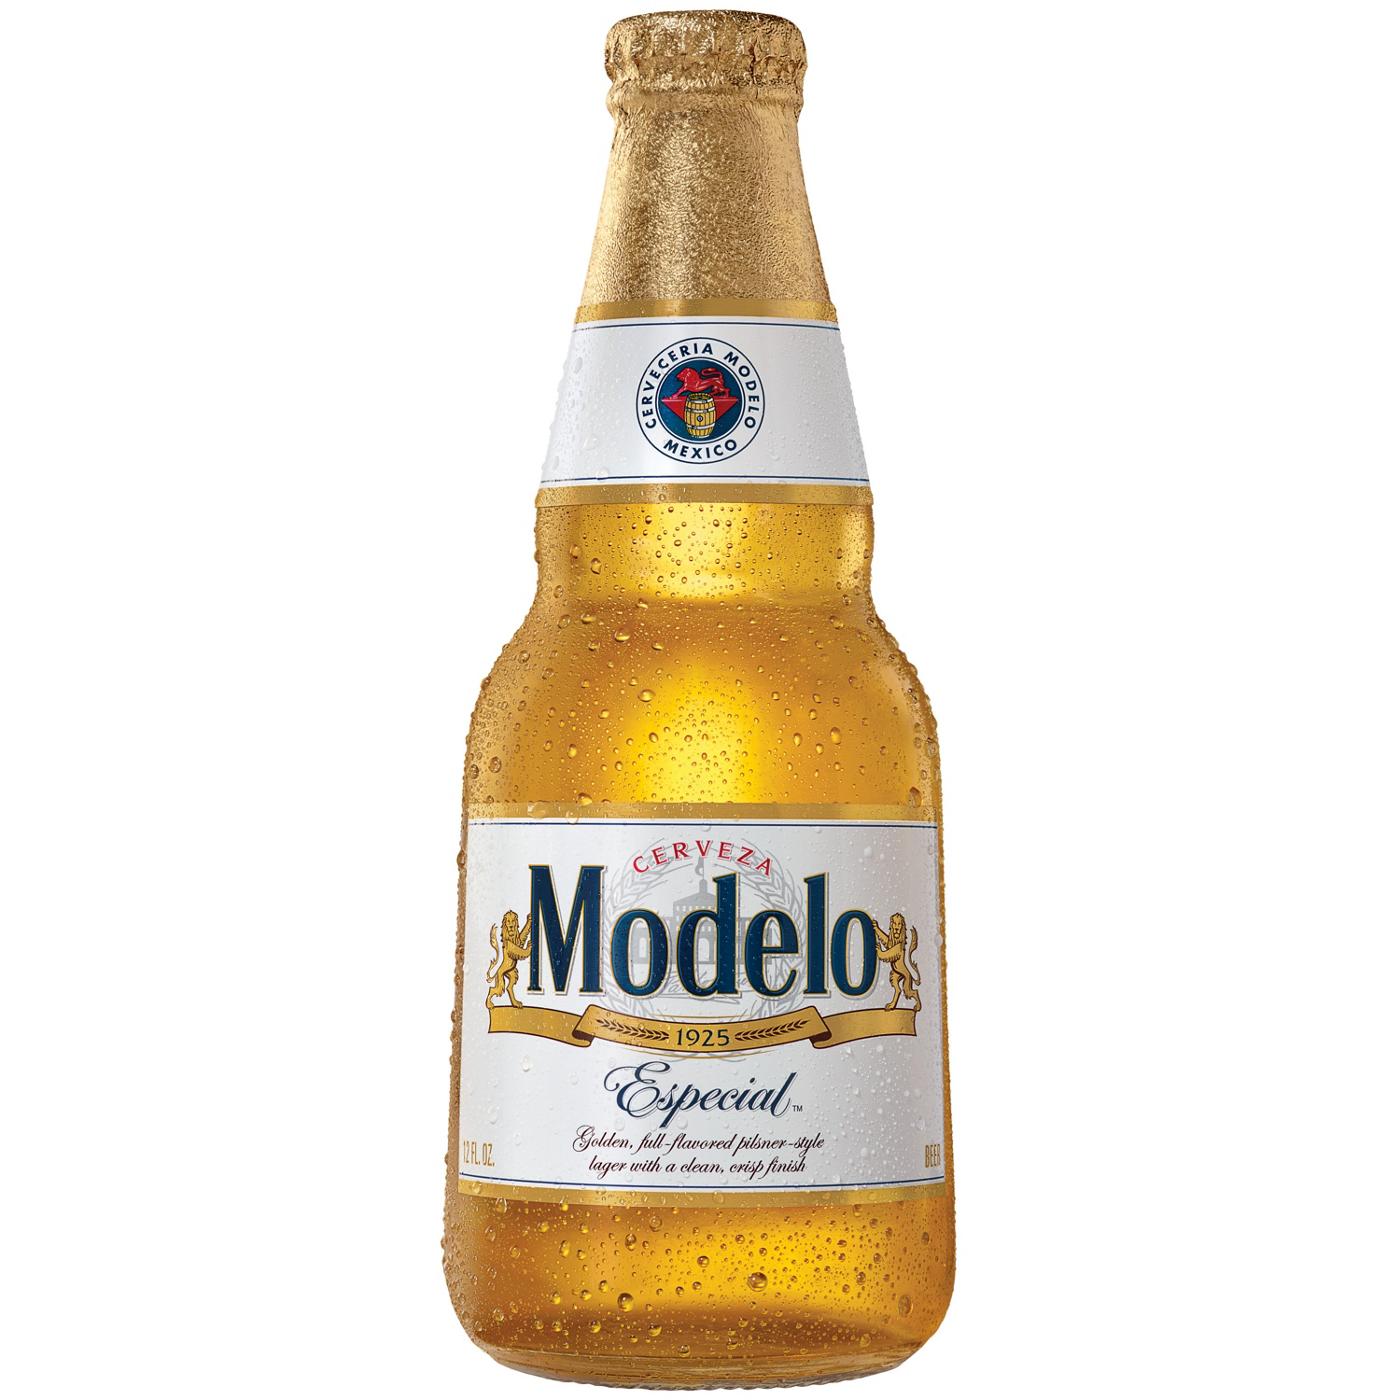 Modelo Especial Mexican Lager Import Beer 12 oz Bottles, 6 pk; image 10 of 10